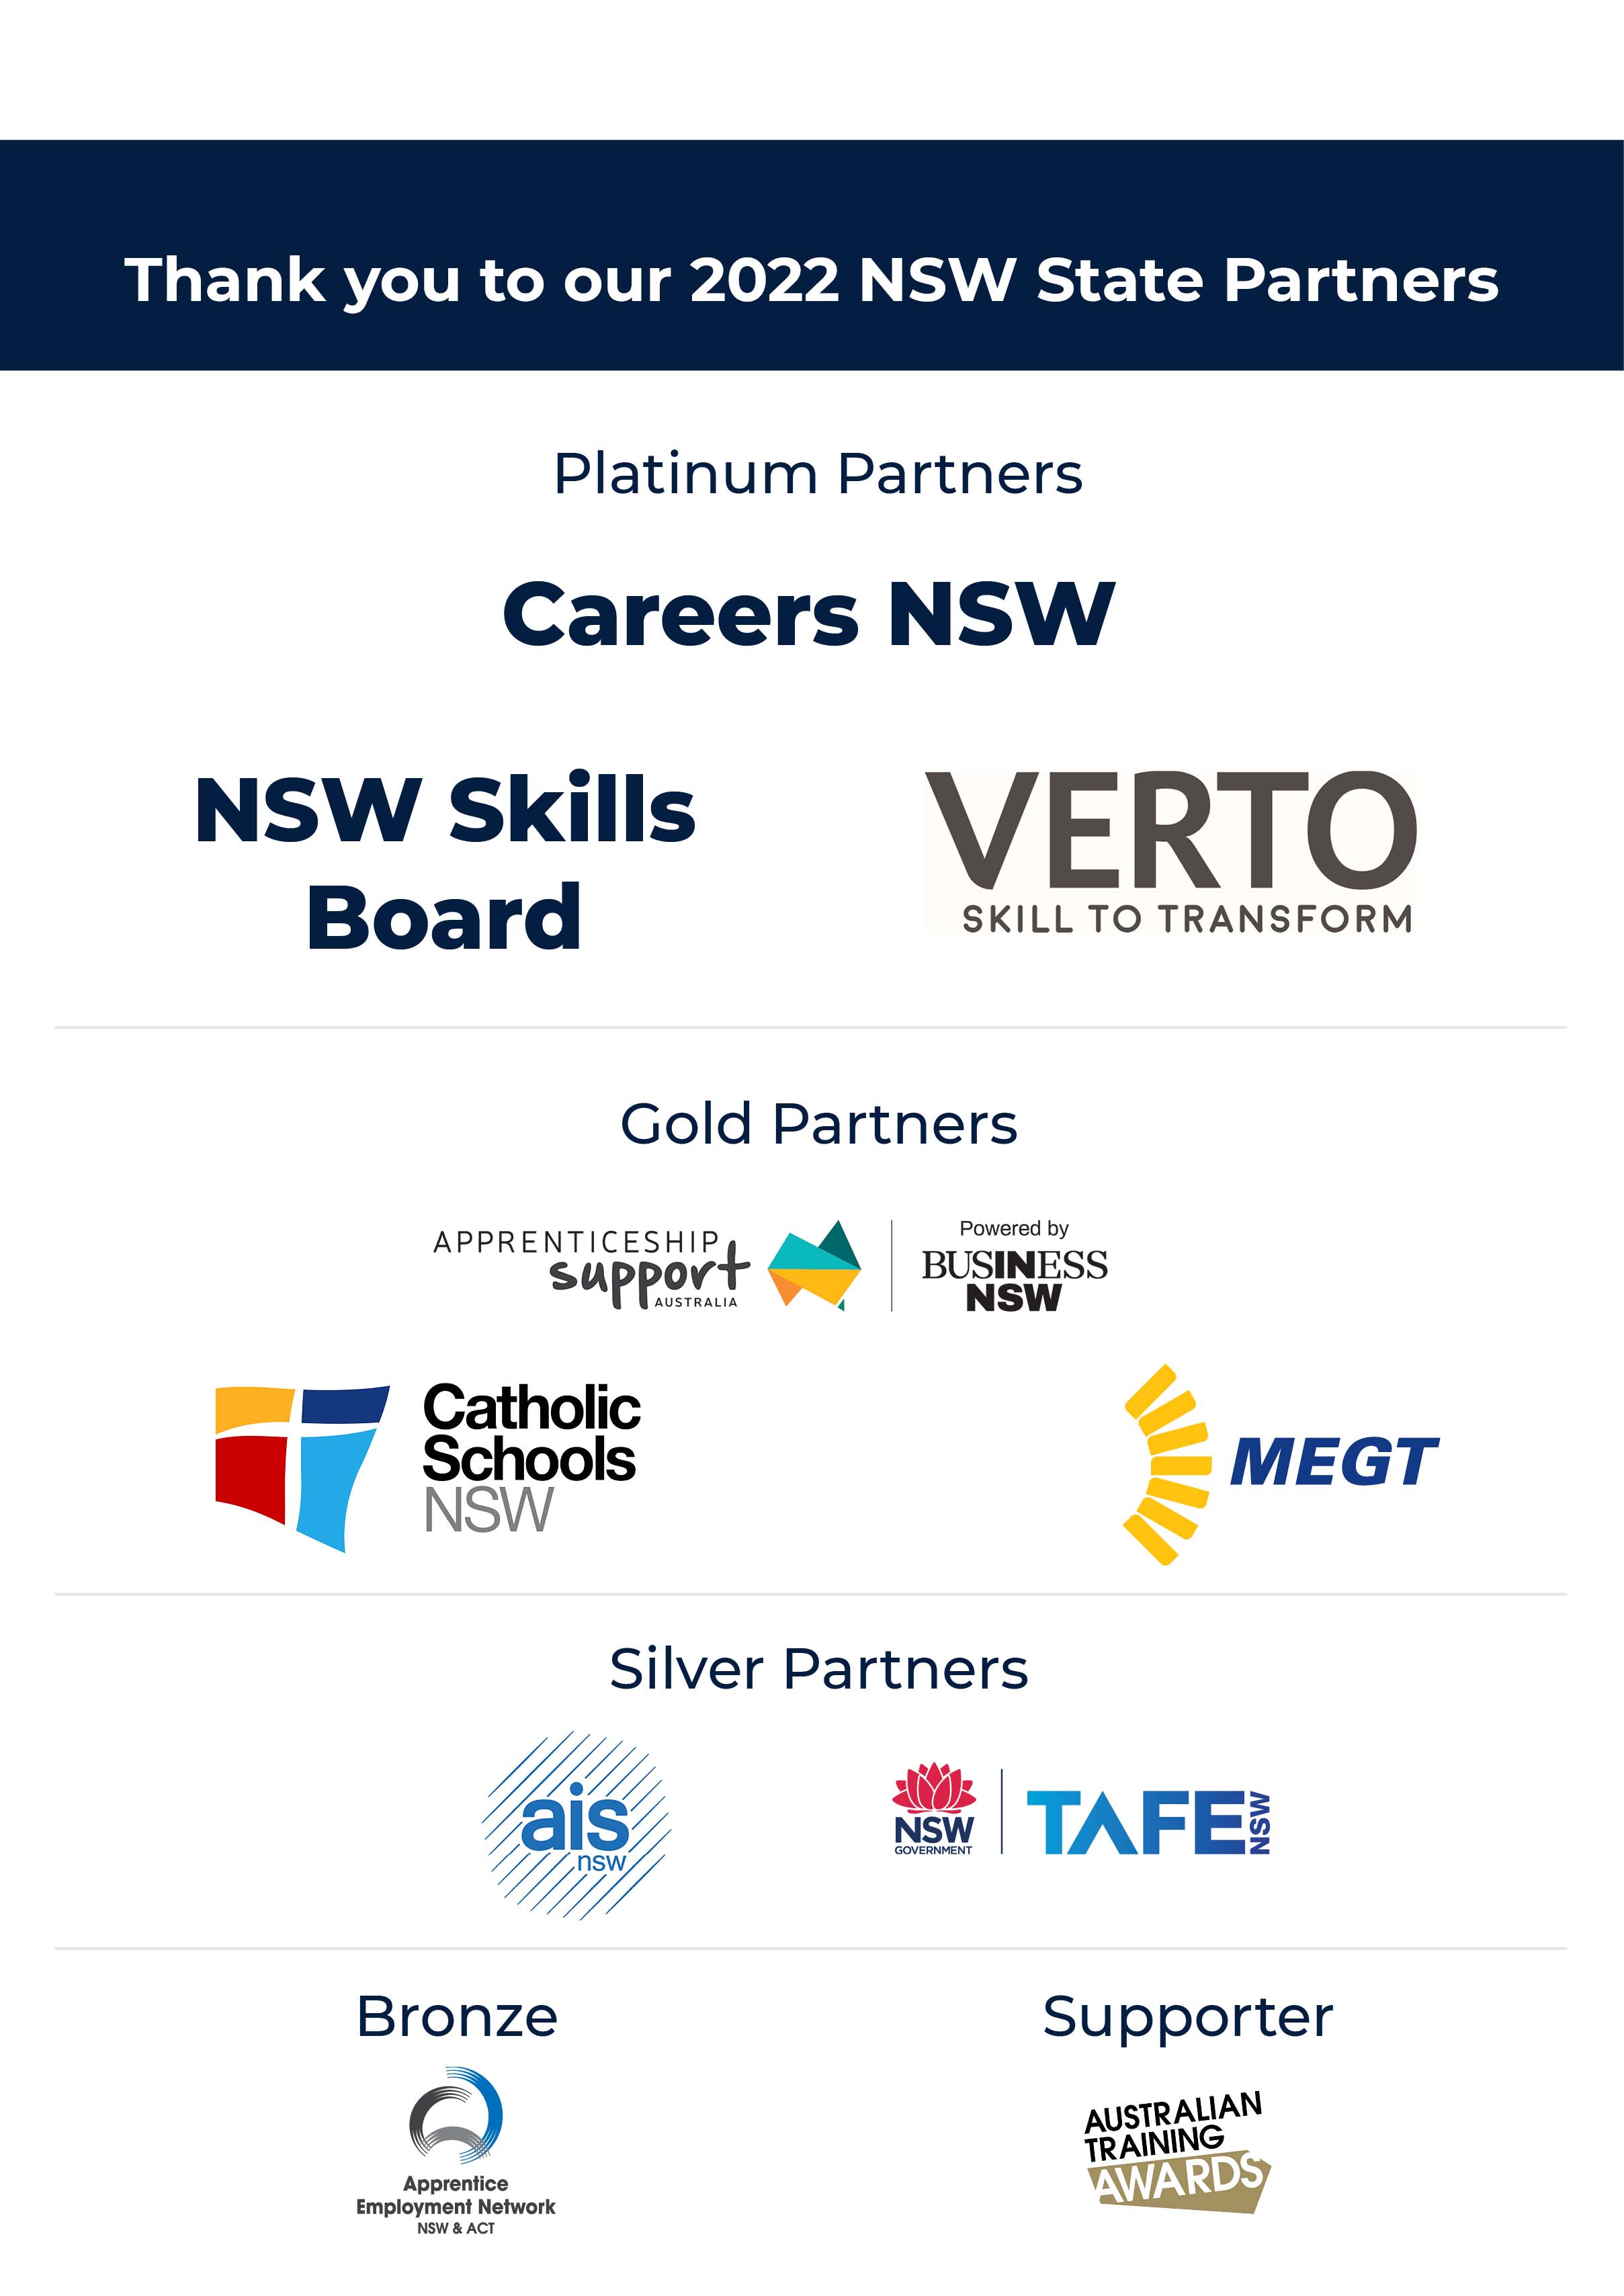 Logos of our partners. Platinum Partners - VERTO and NSW Skills Board, Gold Partners - Apprenticeship Support Australia and Catholic Schools NSW Silver Partners - Association of Independent Schools of NSW and TAFE NSW Bronze Partner - Apprentice Employment Network NSW and ACT Supporter - Australian Training Awards